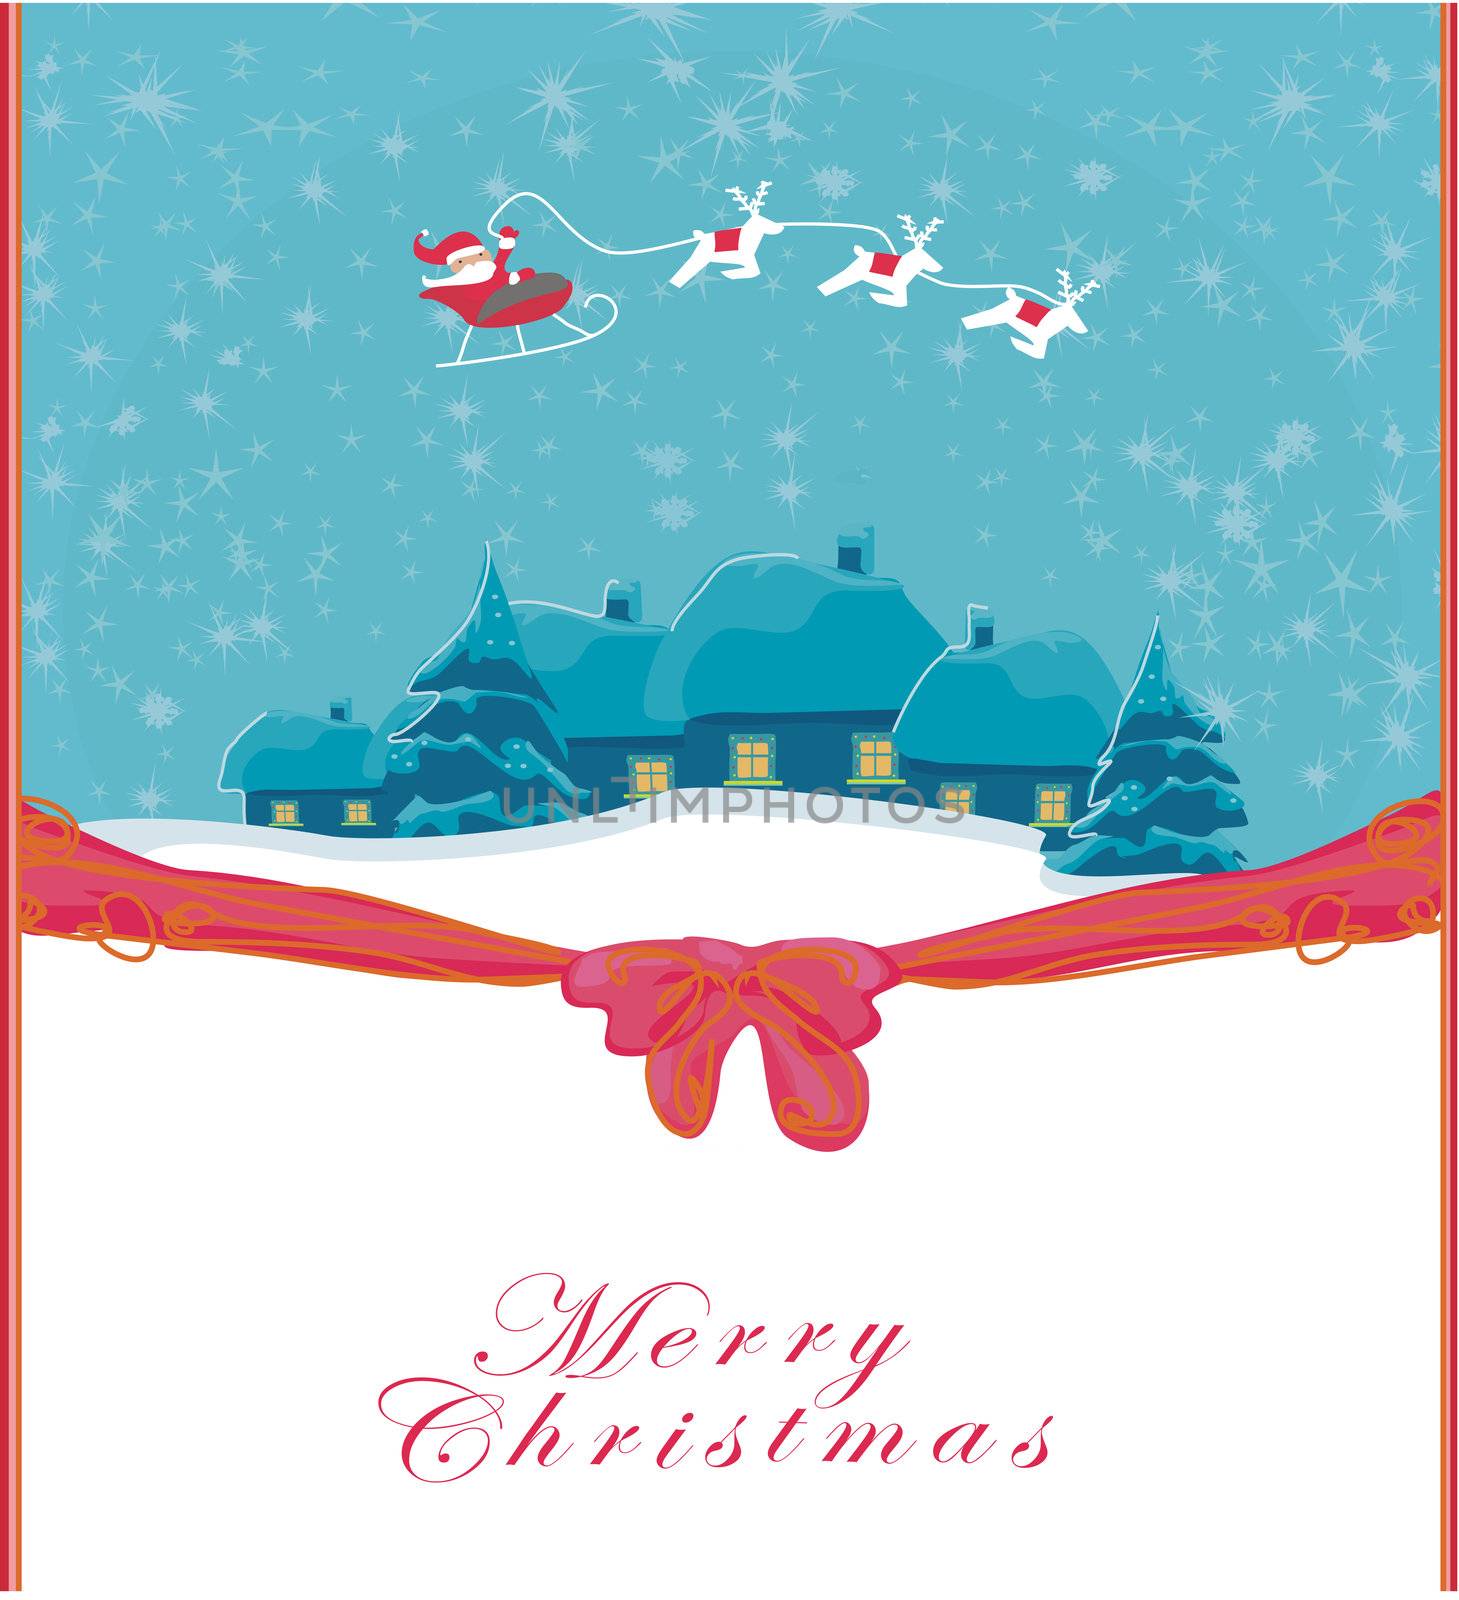 Happy New year card with Santa and winter landscape by JackyBrown